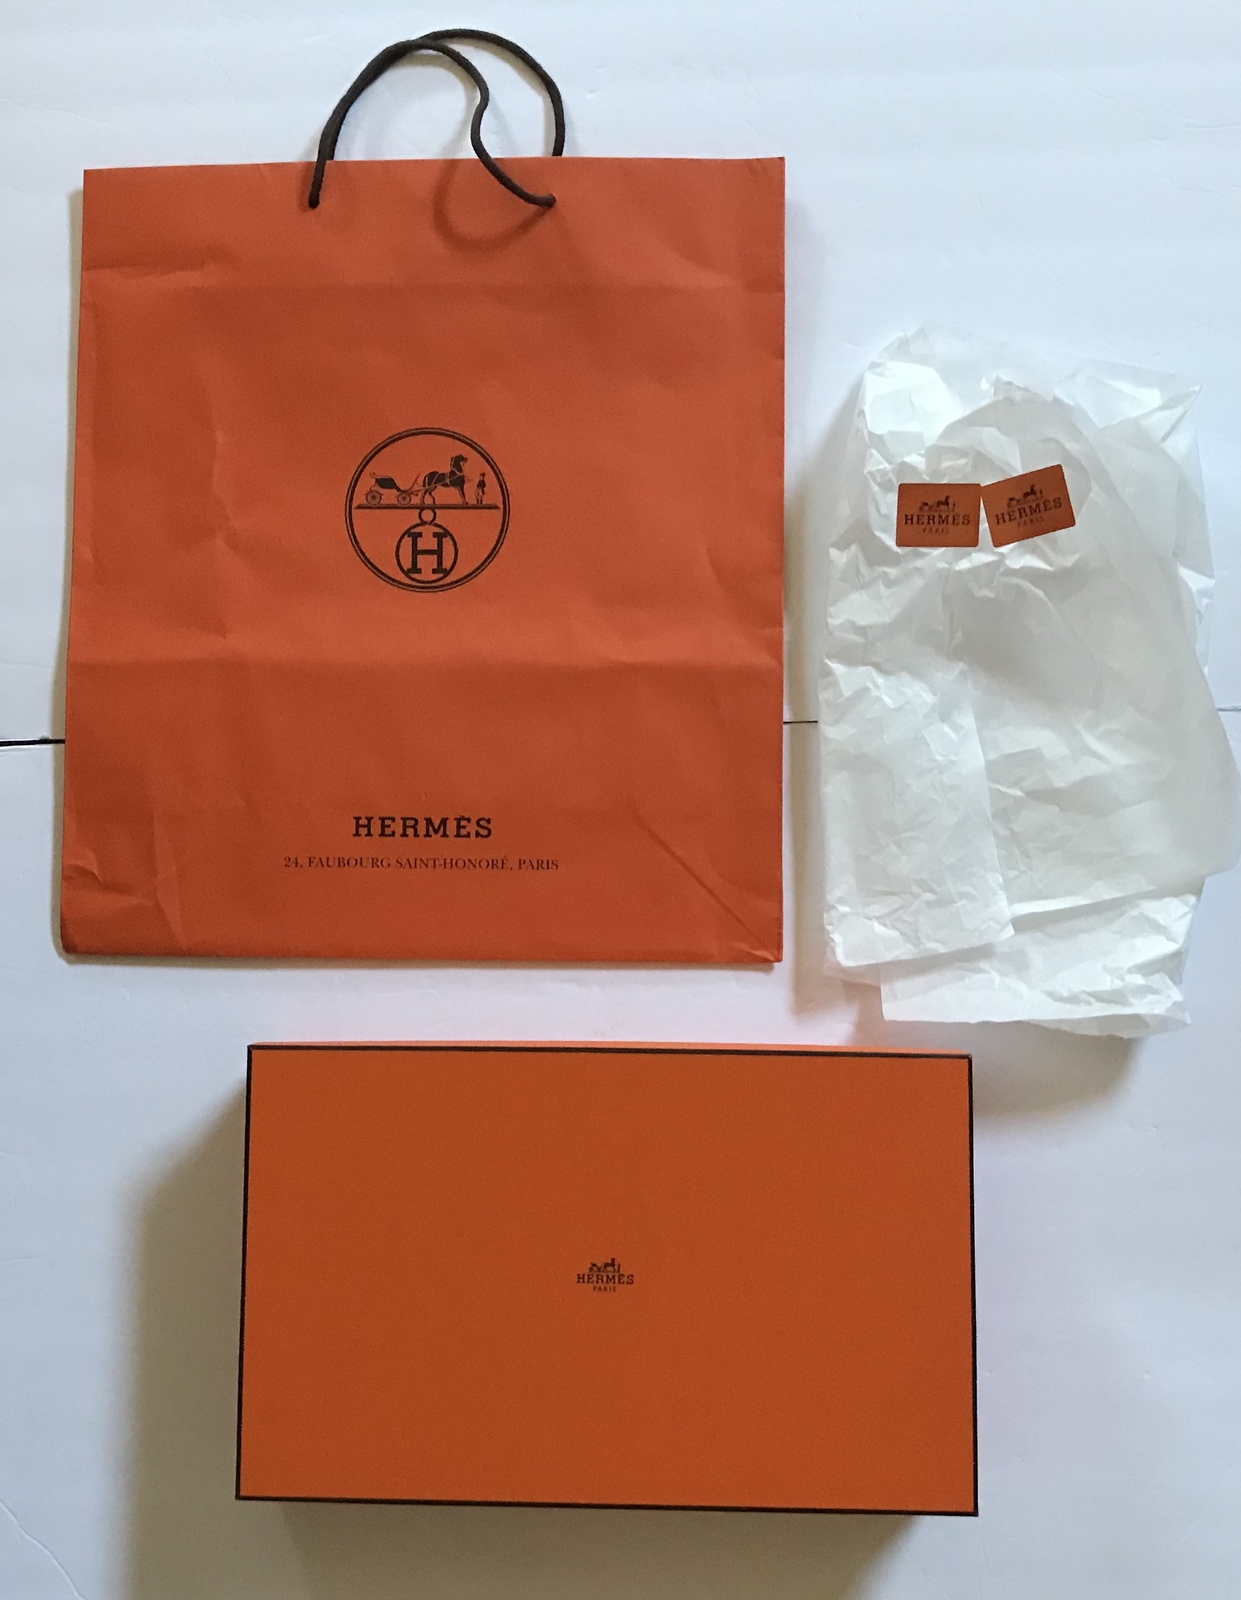 The best quality Hermes bag use LATEST original box comes complete with  dust bags, cards, invoices and shopping bags, using the fastest shipping  method, Federal, UPS and DHL to deliver to you